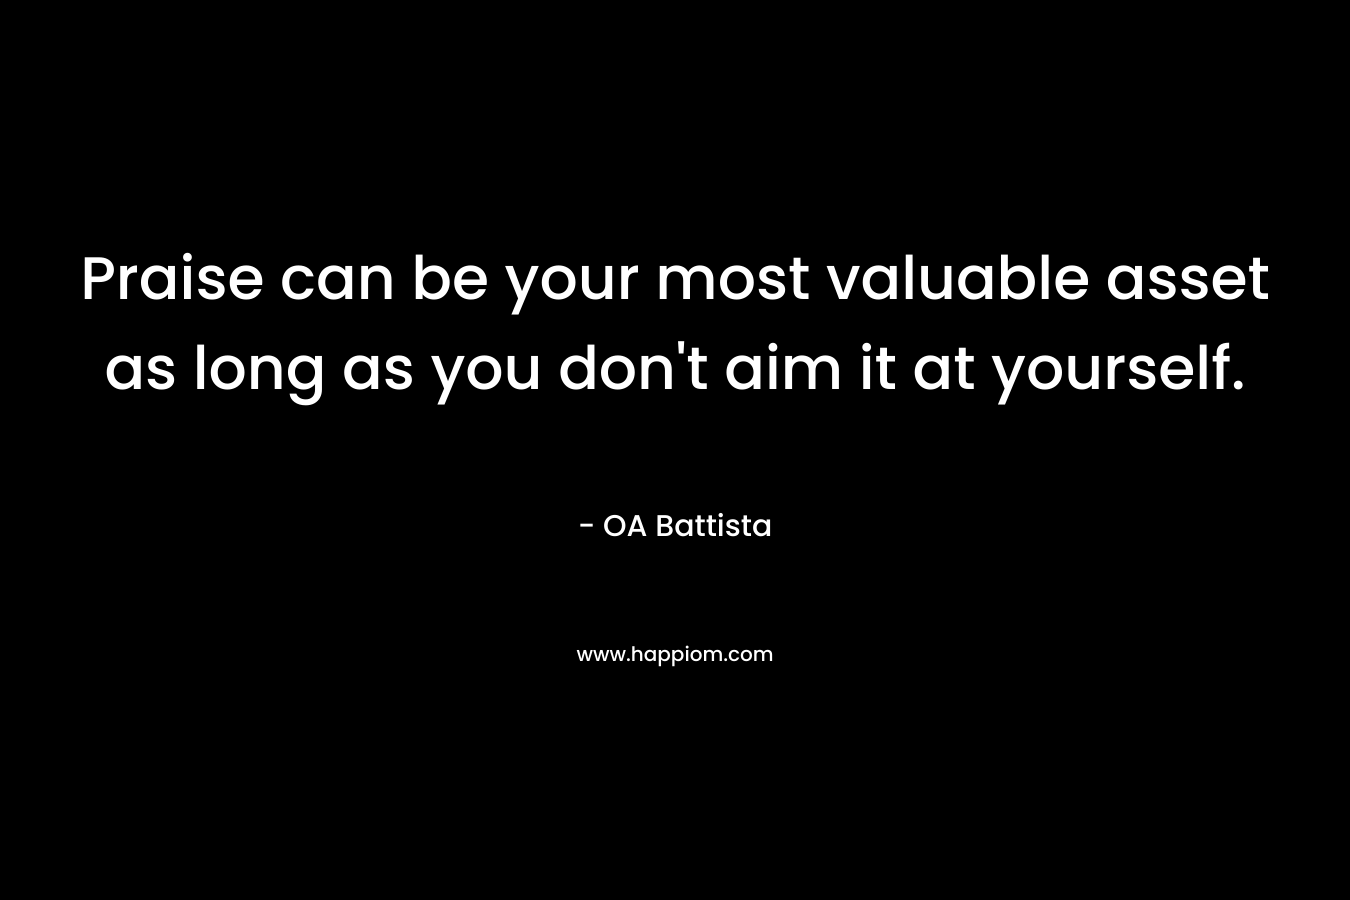 Praise can be your most valuable asset as long as you don’t aim it at yourself. – OA Battista